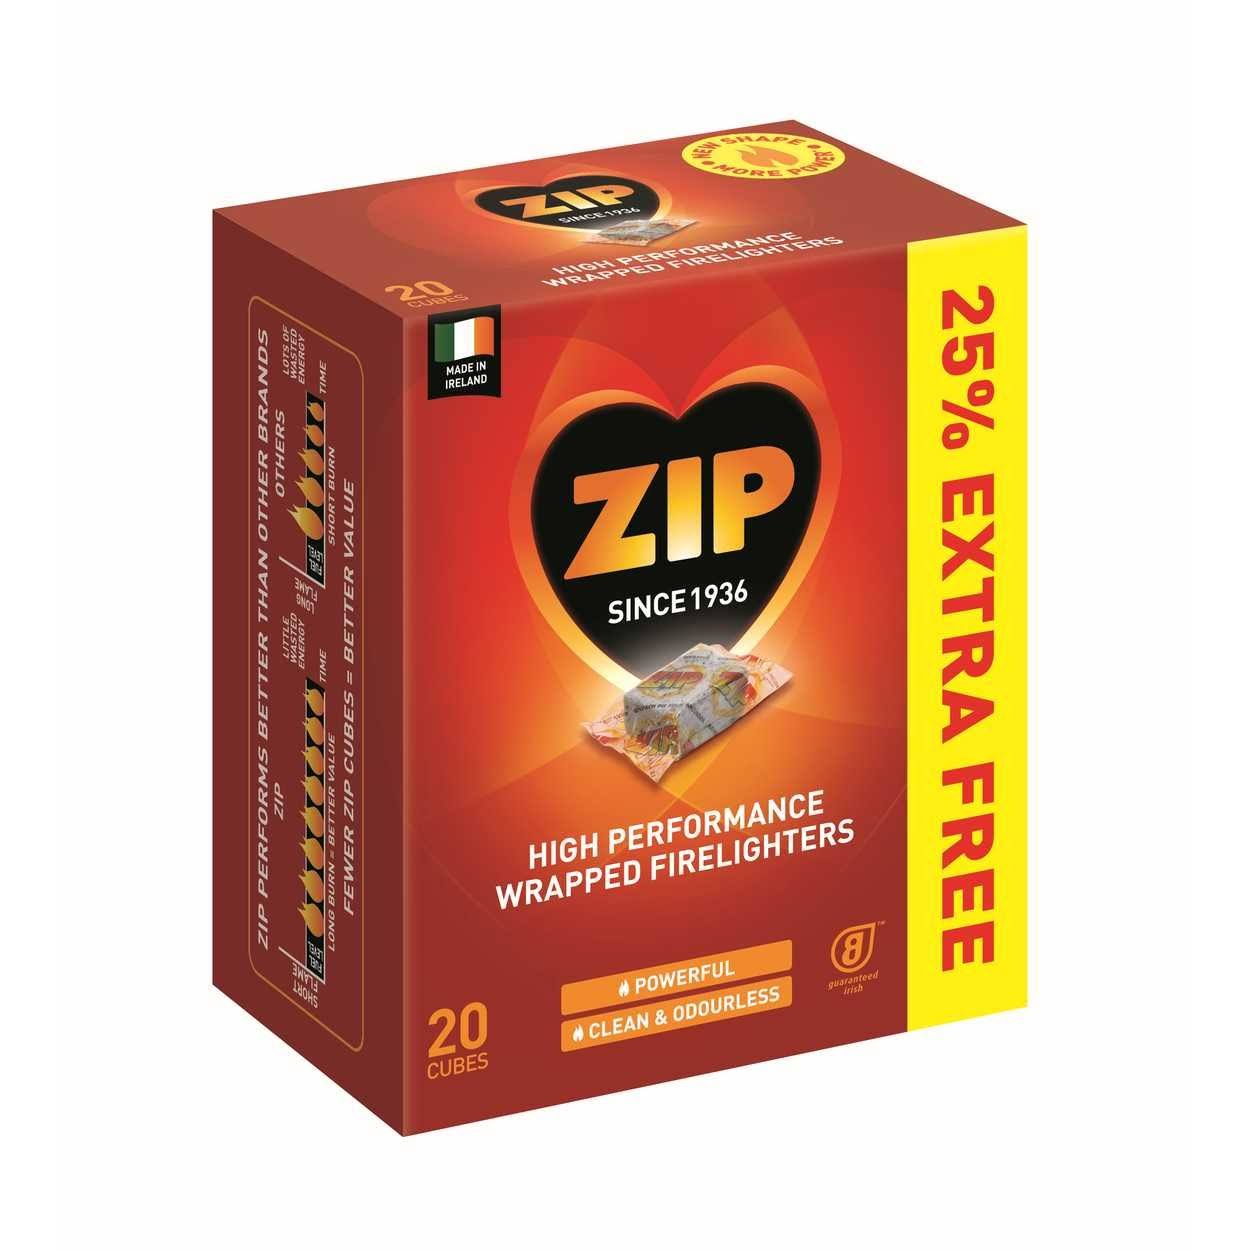 Zip Individually Wrapped Firelighters - 20 Cubes